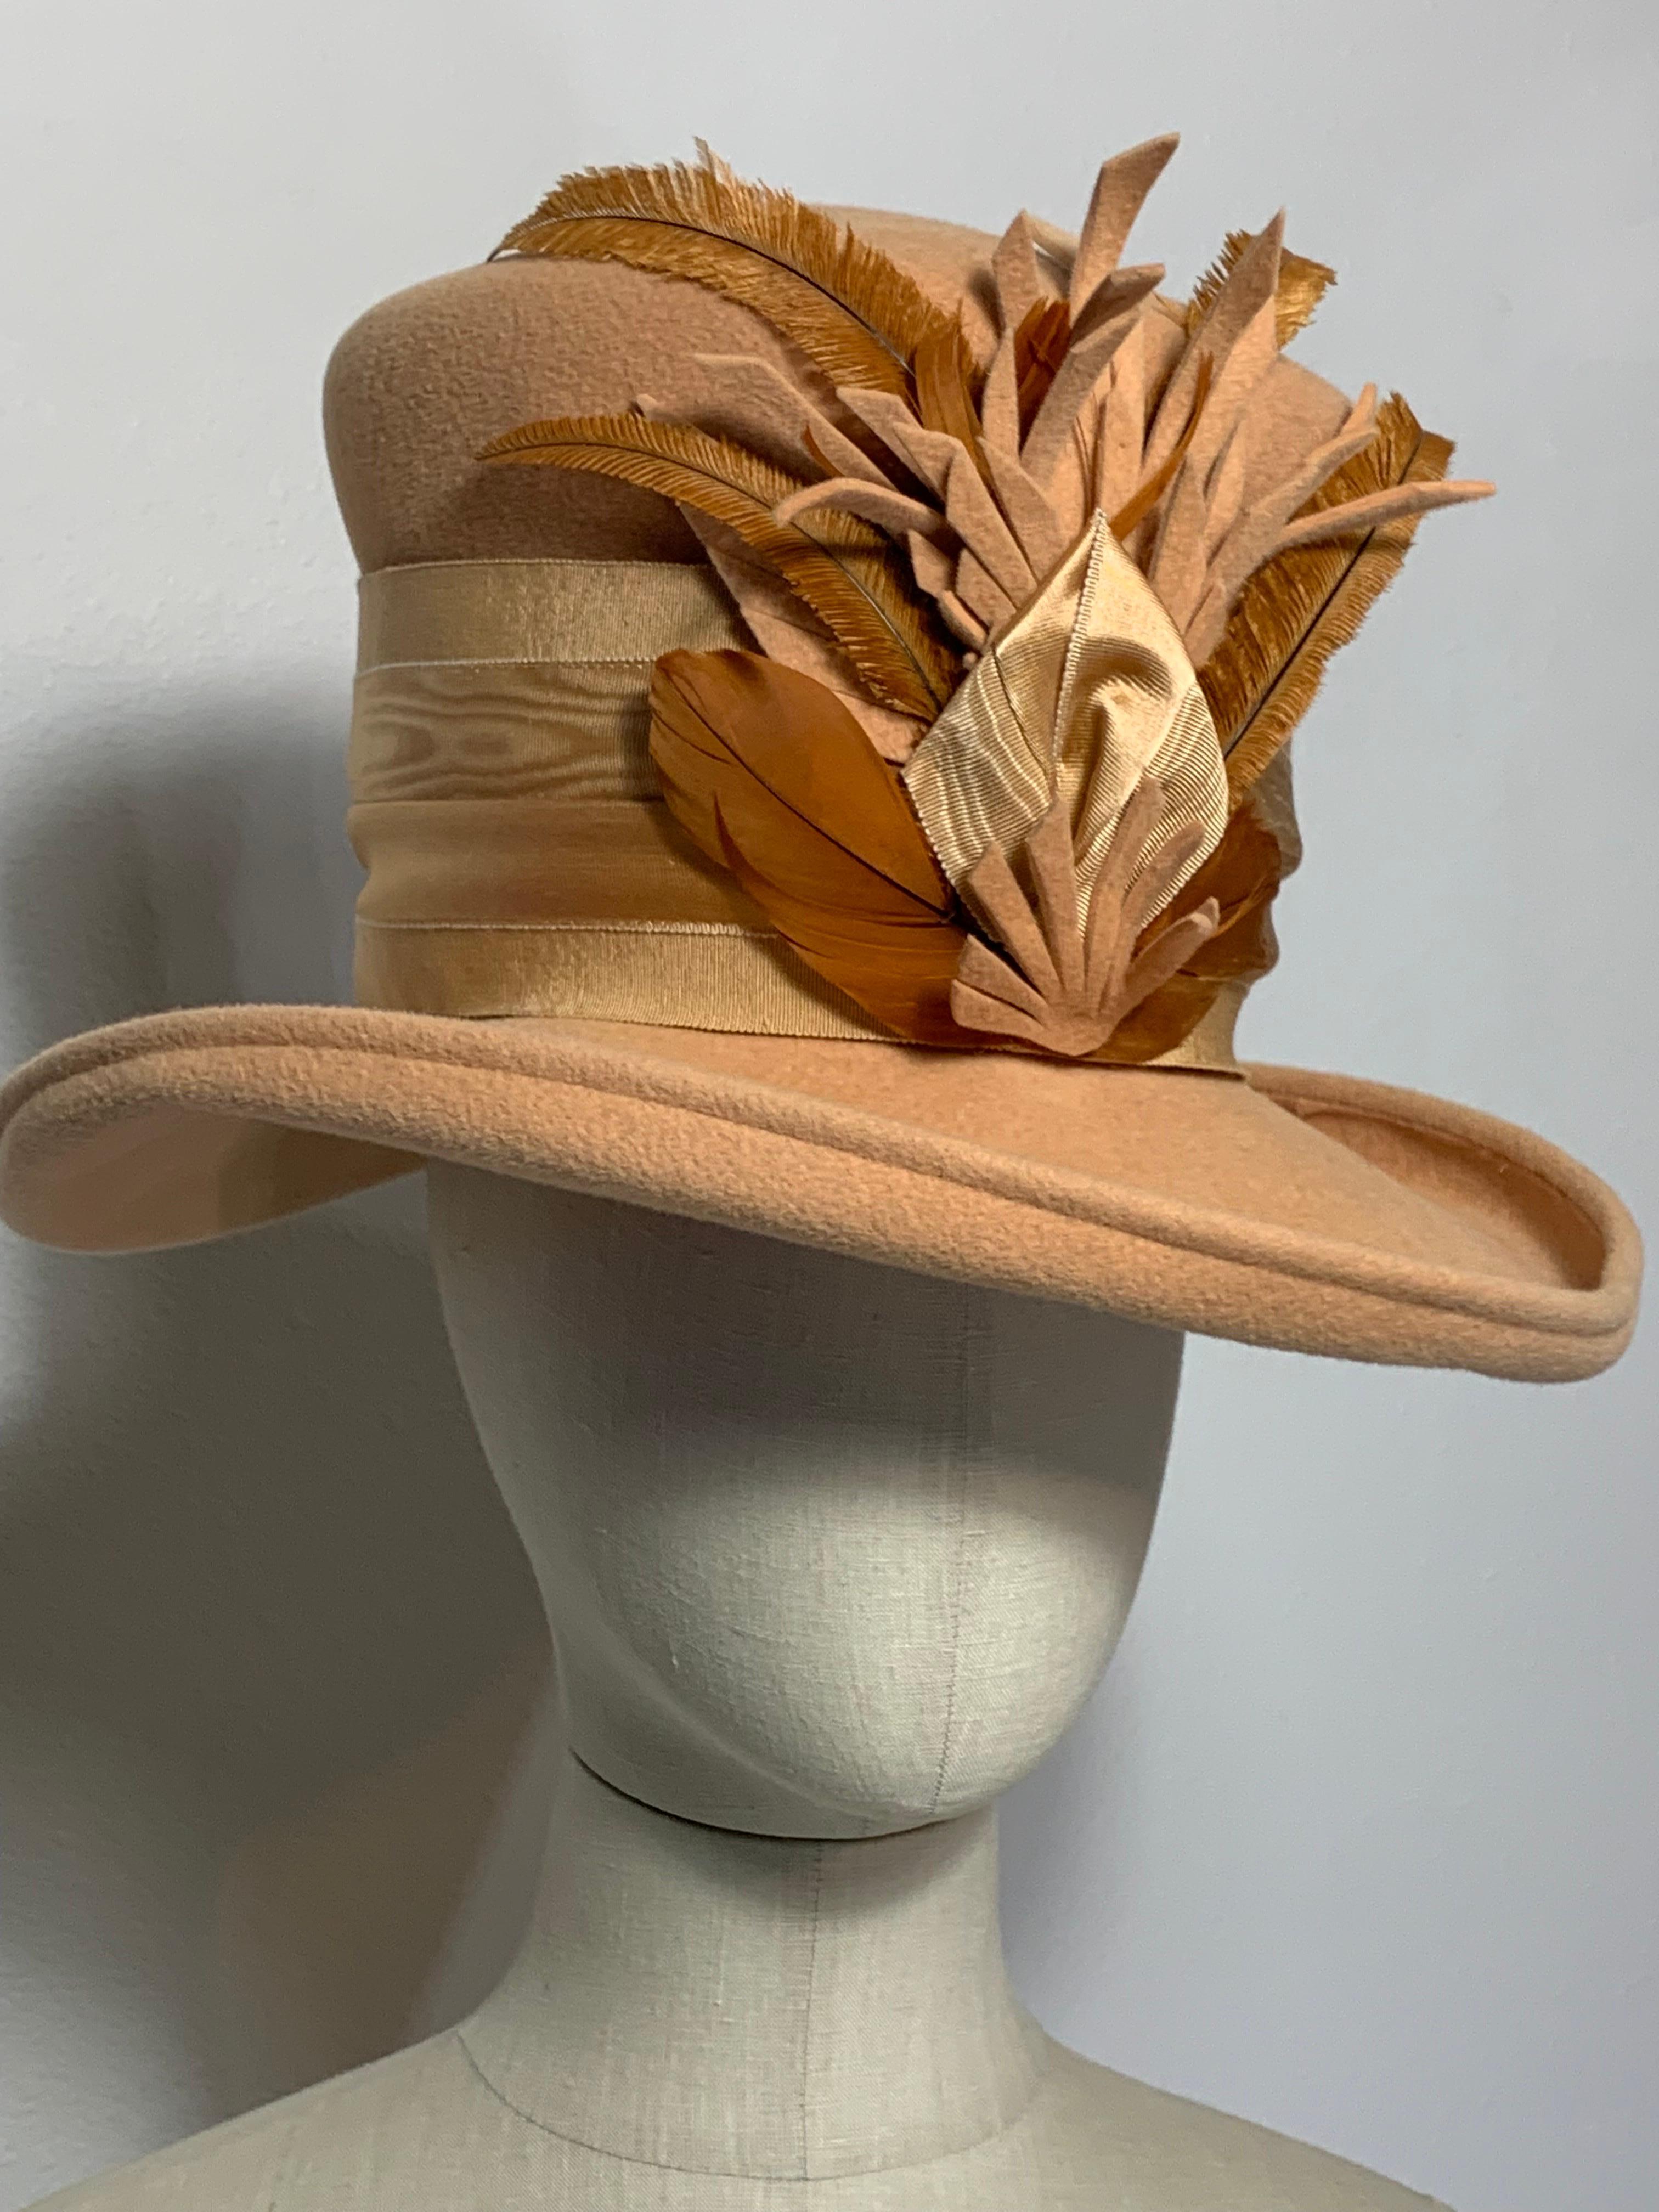 Maison Michel Autumn/Winter Medium Brim Apricot Felt  Beautifully Blocked High Top Hat with Matching Flower, Feathers and Wide Striped Grosgrain Band: Unlabeled, with attached combs for securing. Size 6 5/8 Medium. Made in France. 

Please visit our